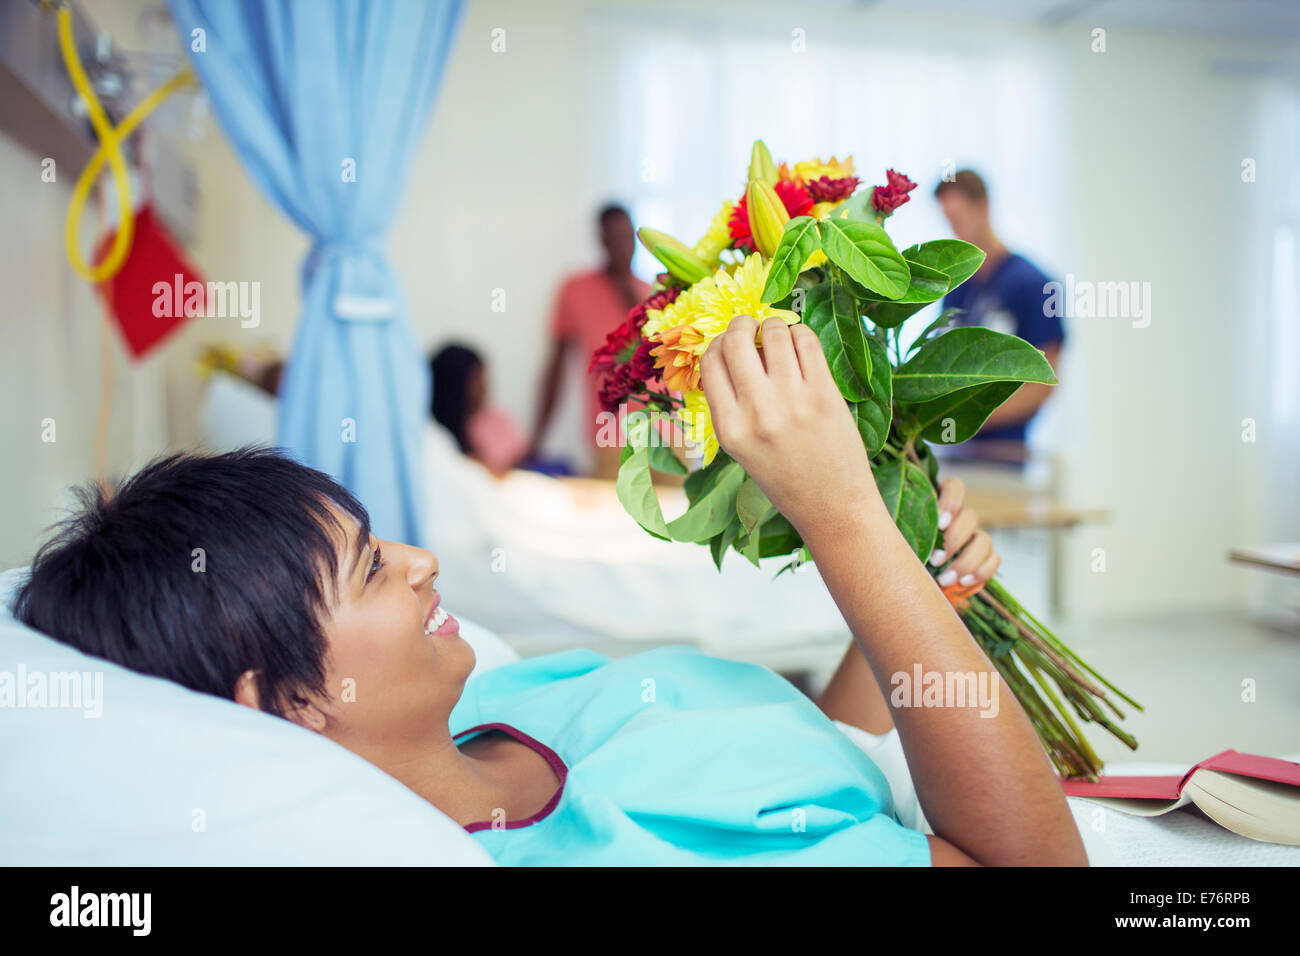 Patient admiring bouquet of flowers in hospital room Stock Photo